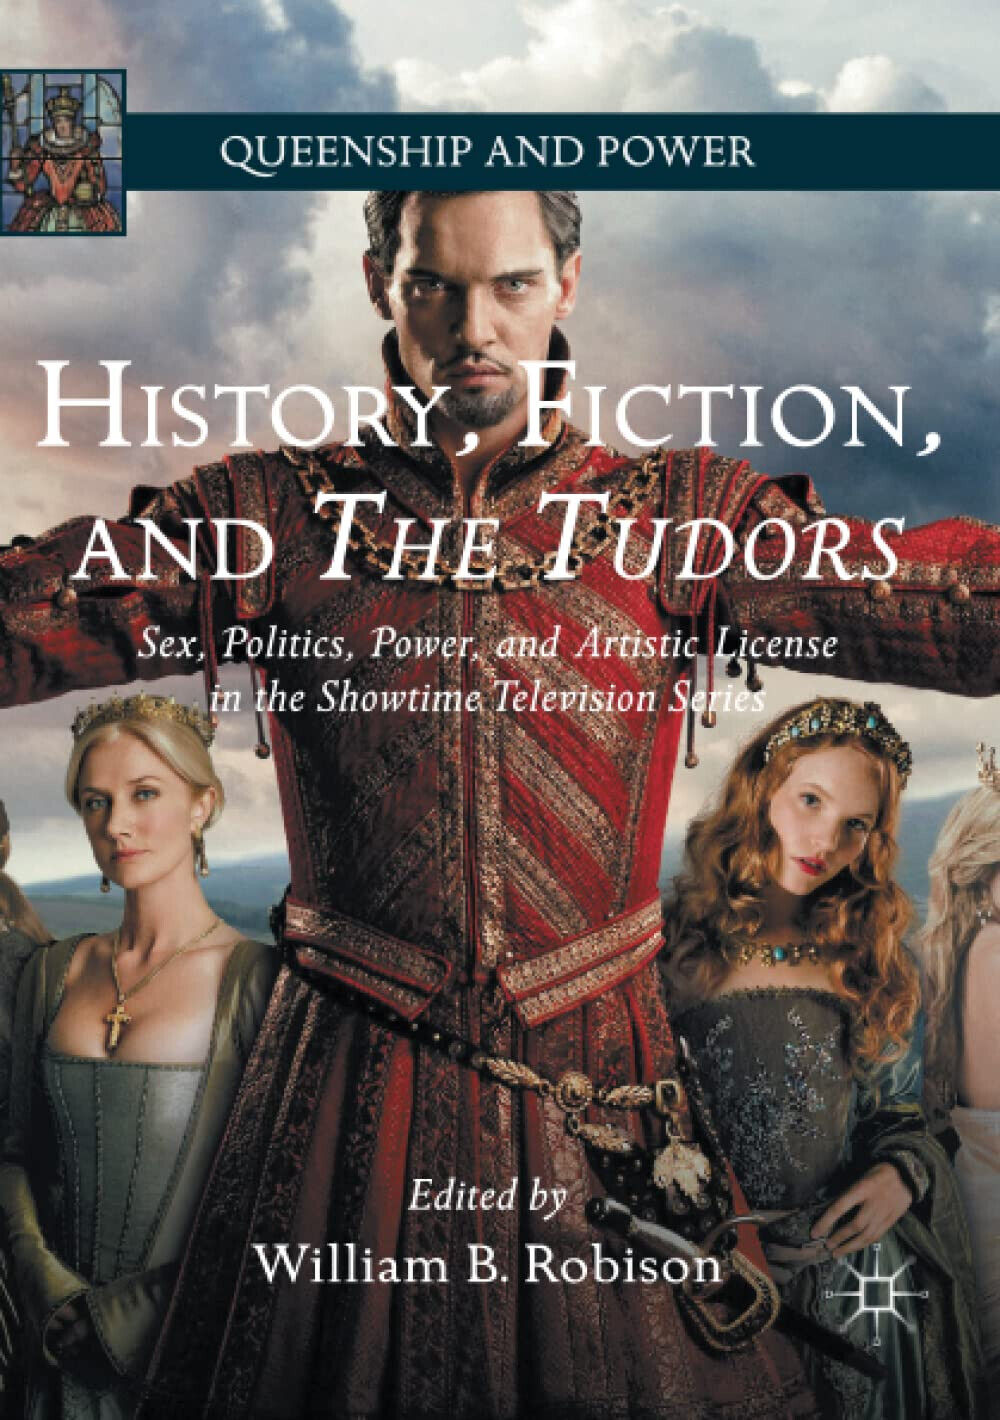 History, Fiction, and The Tudors - William B. Robison - Palgrave, 2018